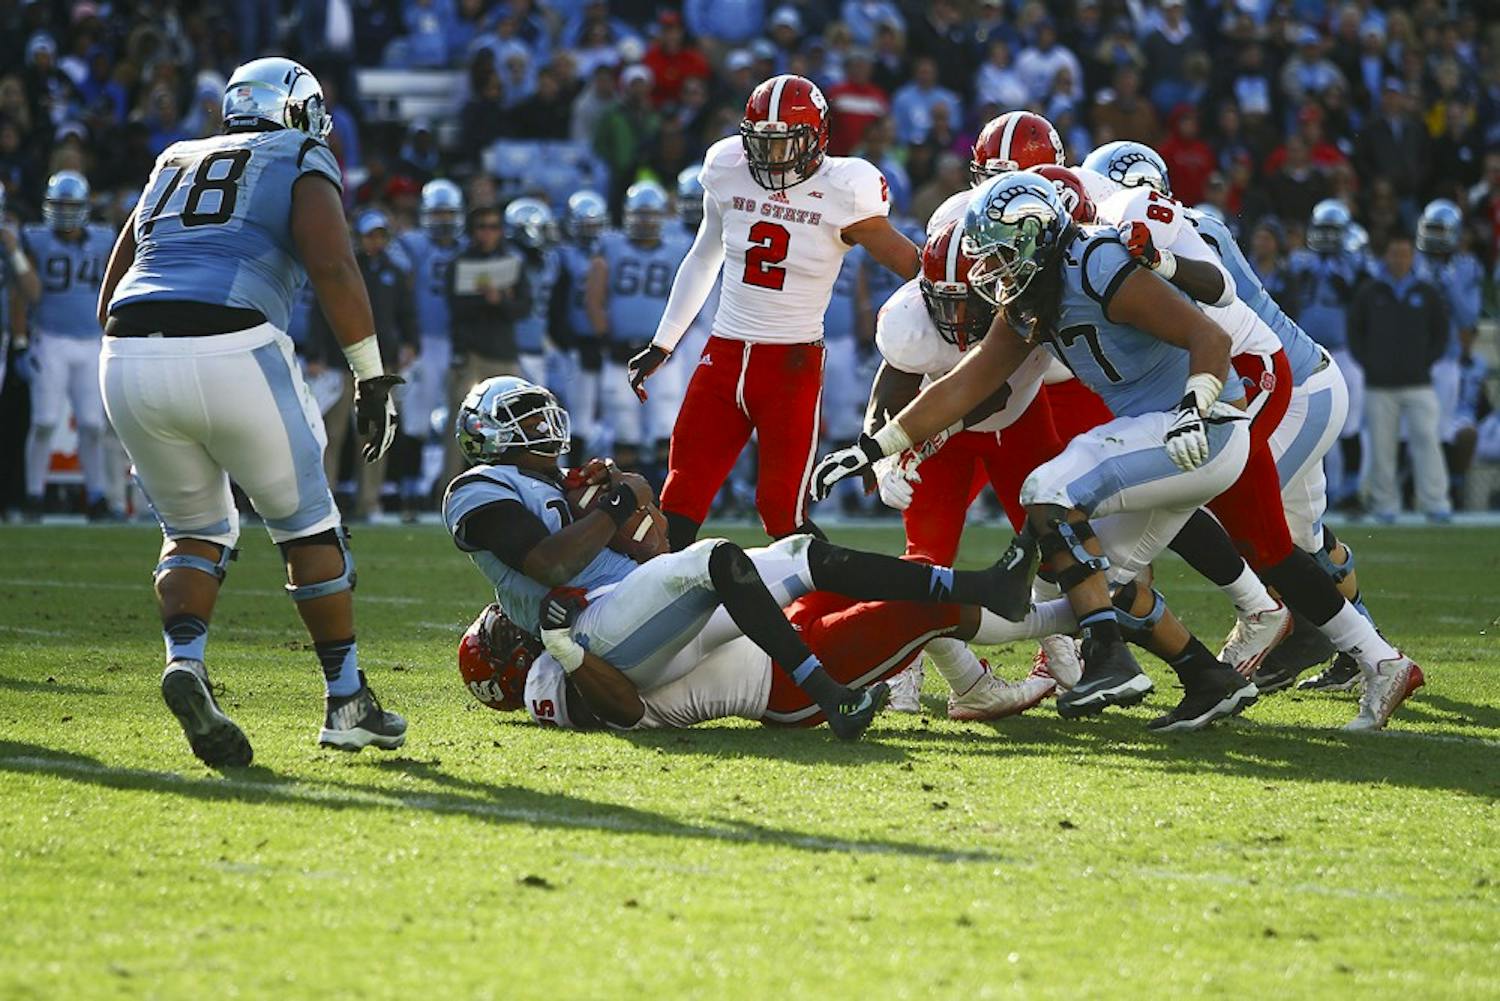 Junior quarterback Marquise Williams (12) is sacked by N.C. State defensive tackle T.Y. McGill (75). The Tar Heels lost 35-7 to the Wolfpack on Saturday.